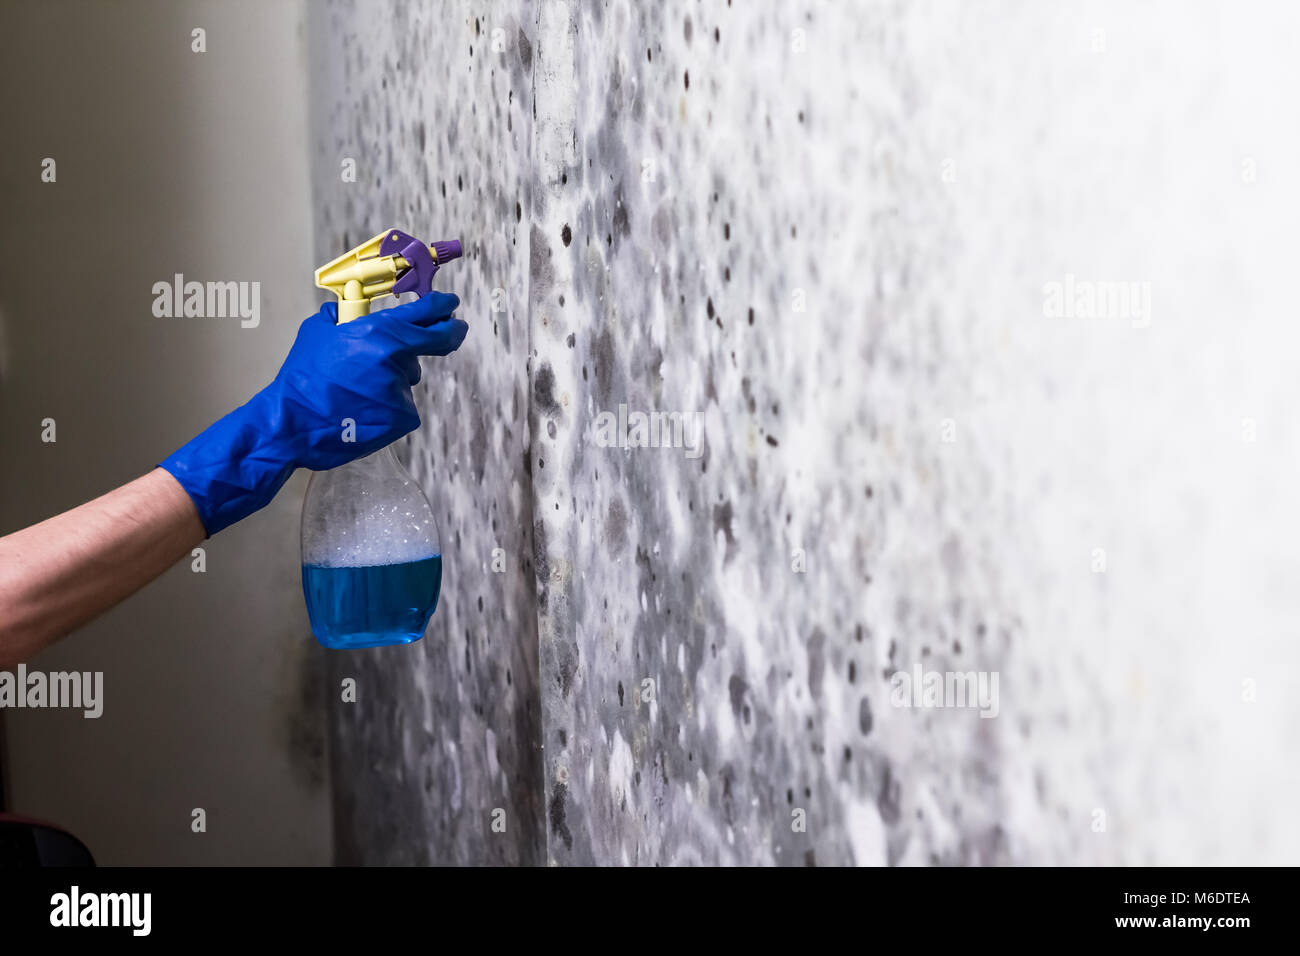 Removing Mold On The Wall In Room Stock Photo 176096210 Alamy